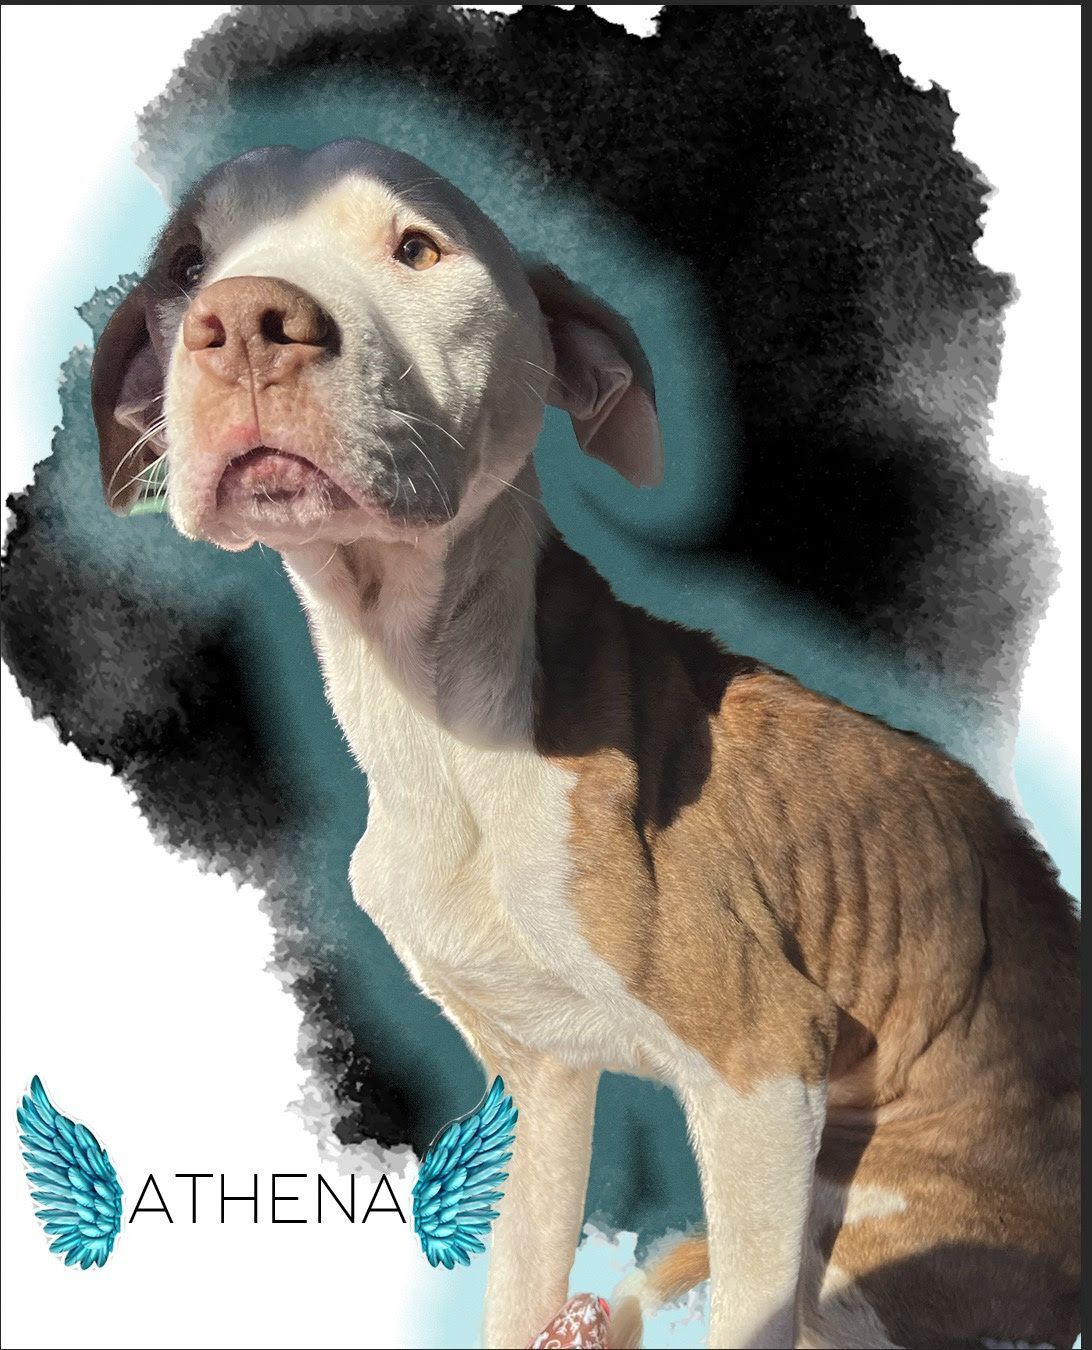 We'll Always Love You, Athena